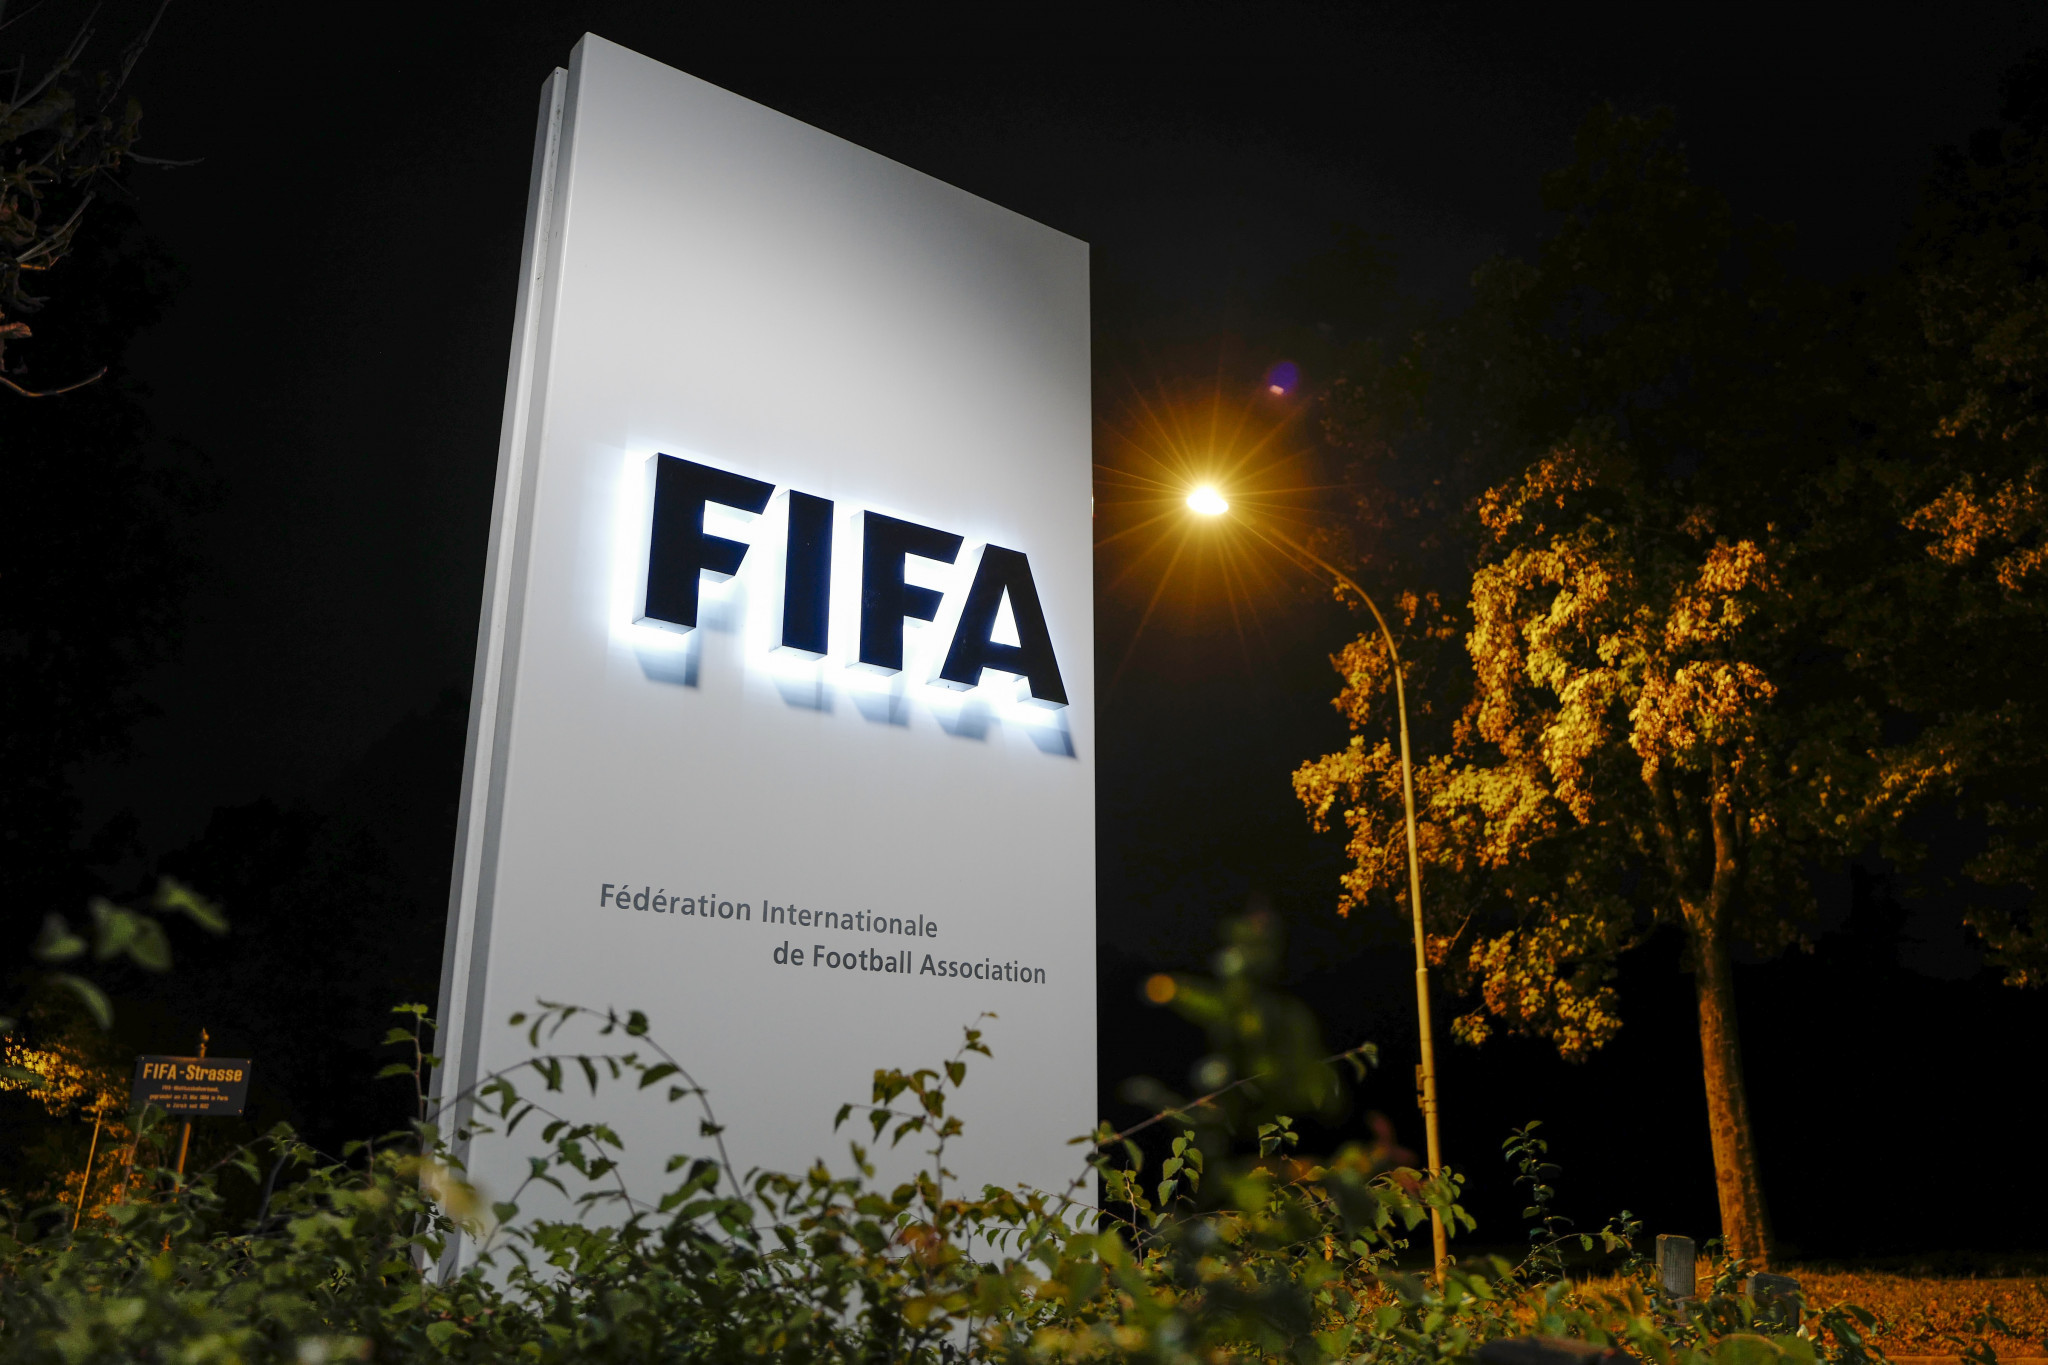 The number of staff at FIFA has doubled over the past six years according to one of the organisation's annual reports ©Getty Images